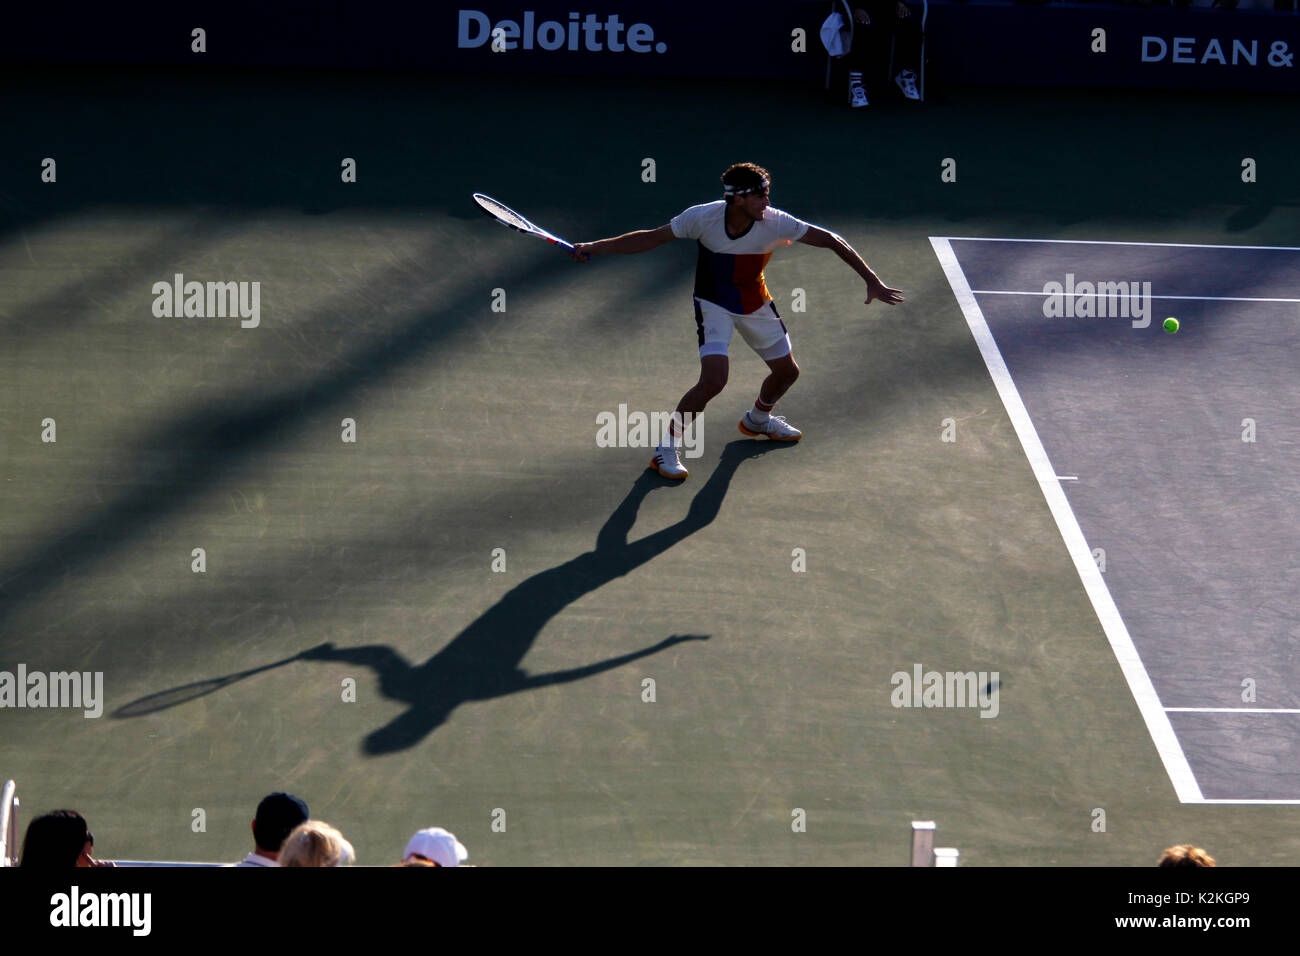 New York, United States. 31st Aug, 2017. US Open Tennis: New York, 31 August, 2017 - Austria's Dominic Thiem during his second round match against Taylor Frtiz of the United States at the US Open in Flushing Meadows, New York. Credit: Adam Stoltman/Alamy Live News Stock Photo